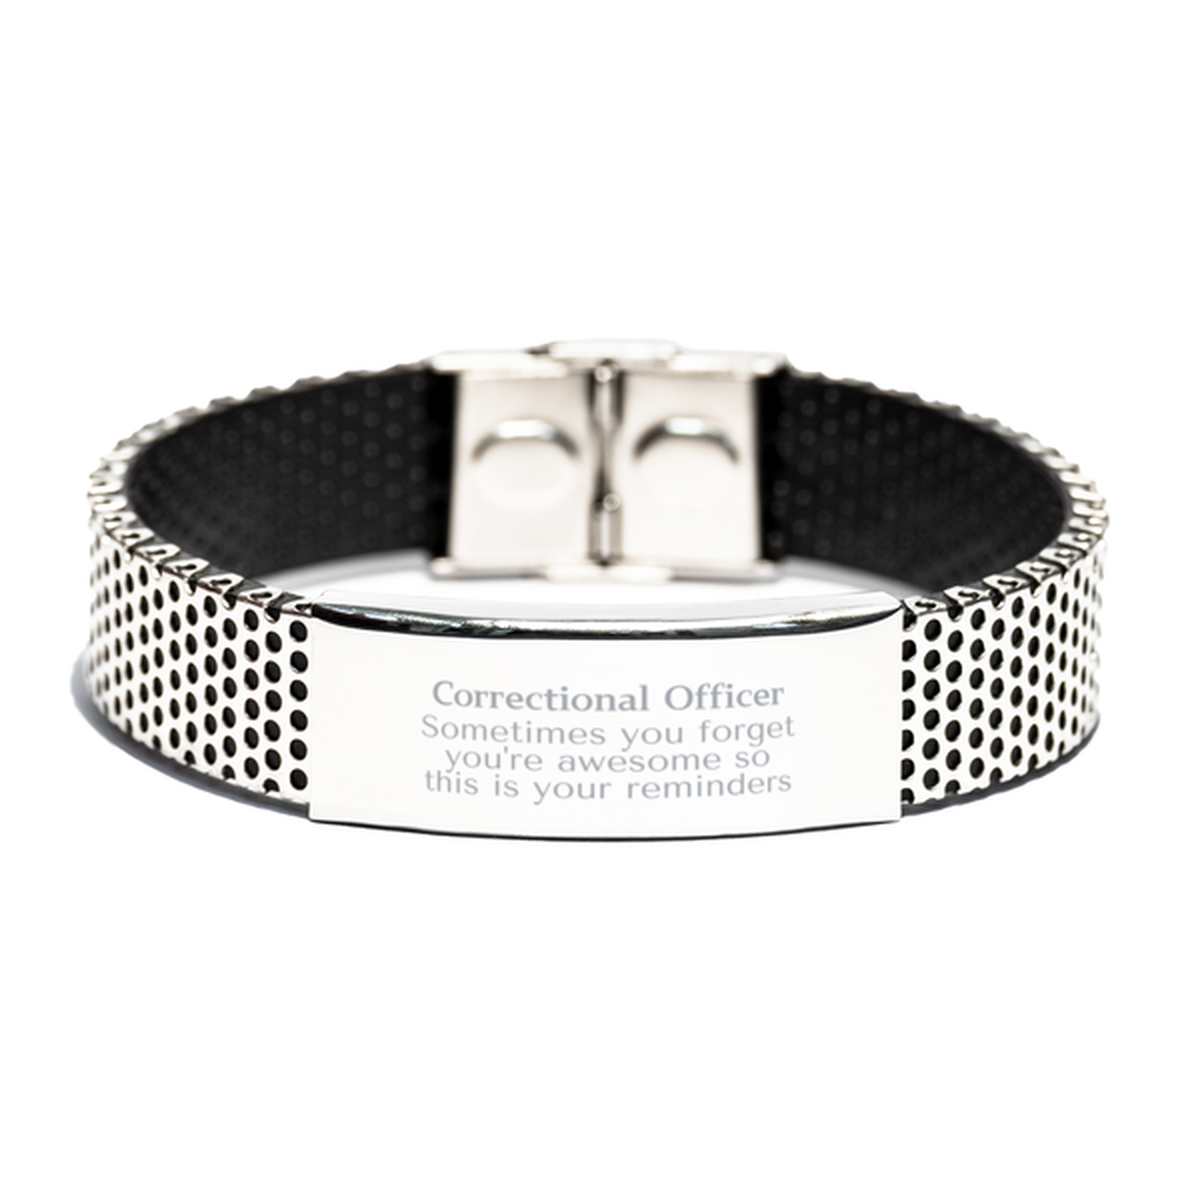 Sentimental Correctional Officer Stainless Steel Bracelet, Correctional Officer Sometimes you forget you're awesome so this is your reminders, Graduation Christmas Birthday Gifts for Correctional Officer, Men, Women, Coworkers